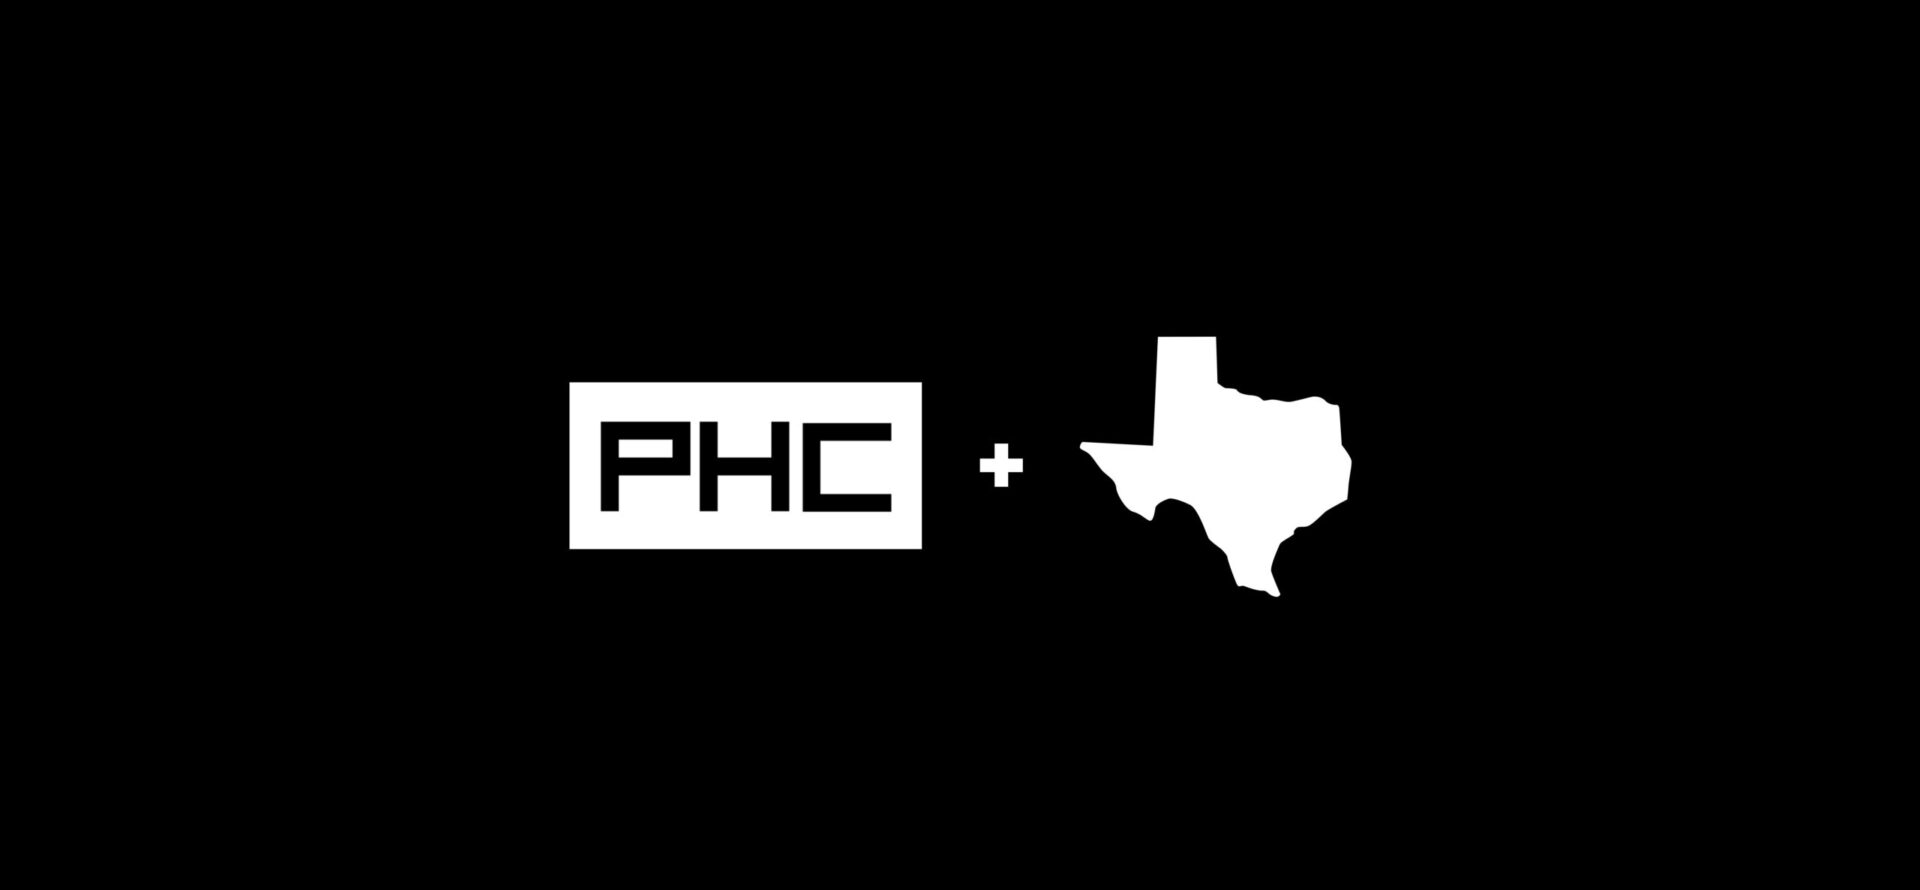 PHC logo with a plus sign followed by a white silhouette of Texas on a black background.